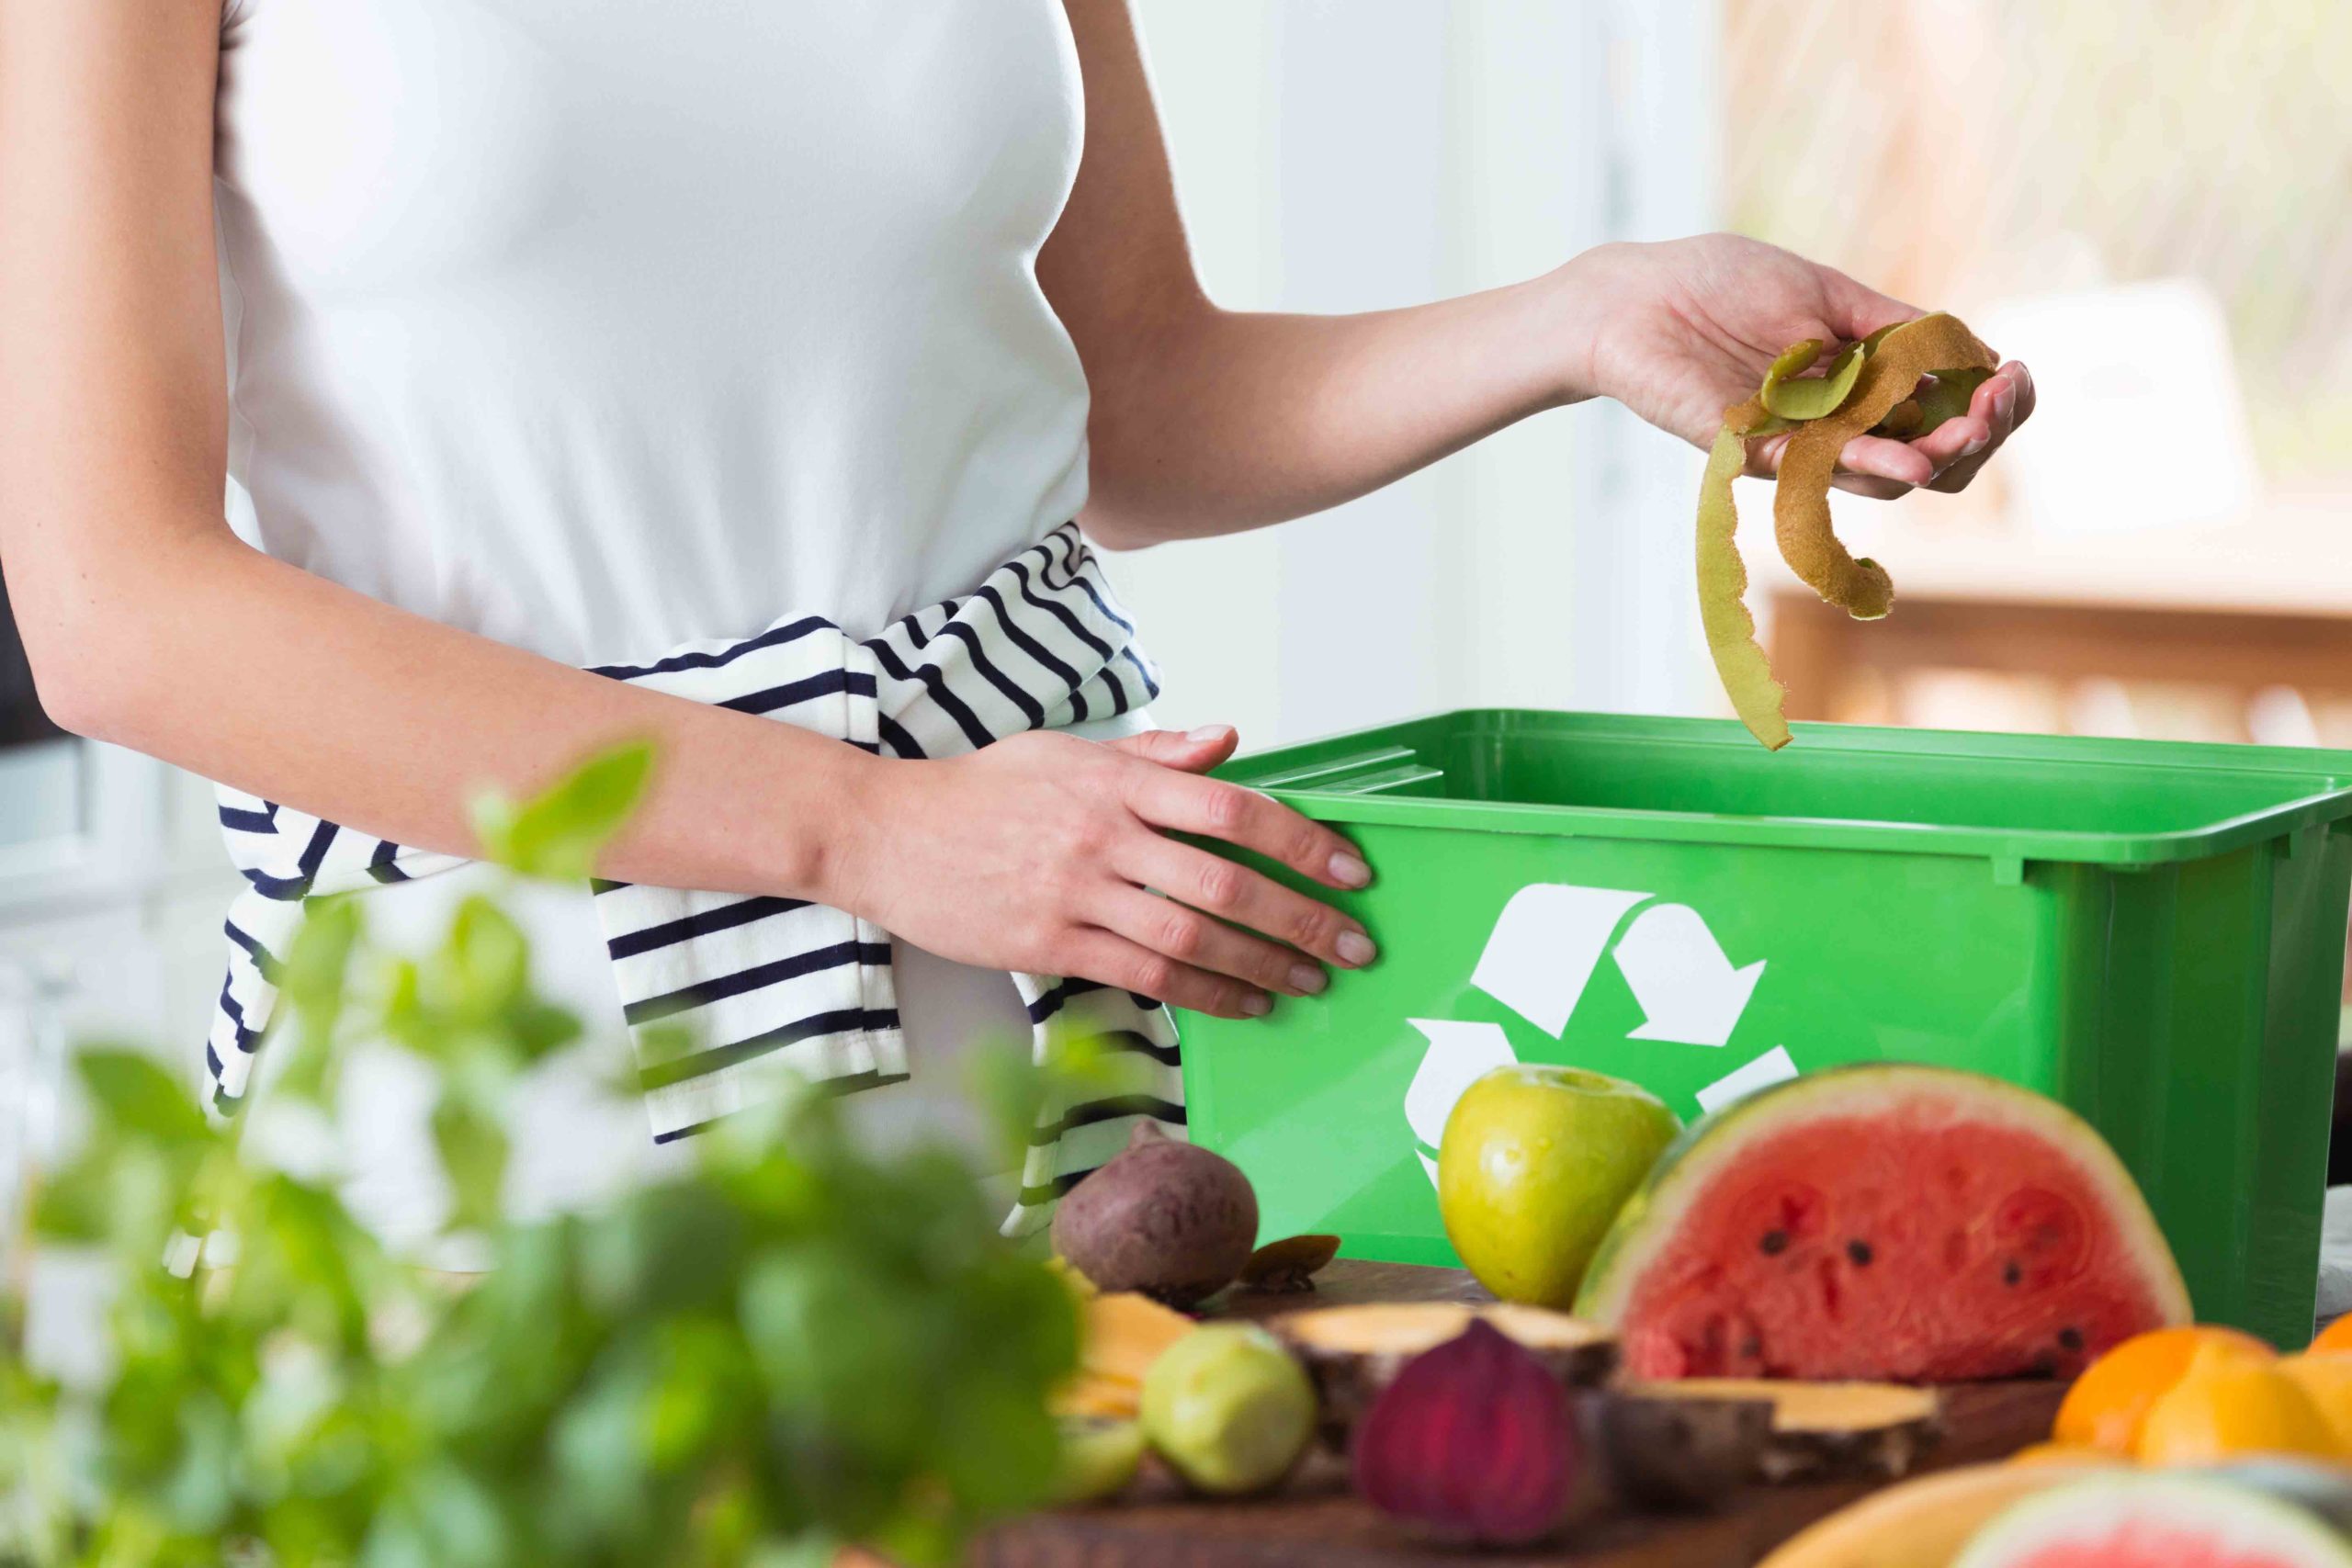 Composting food waste - what you need to know - Recycle Track Systems